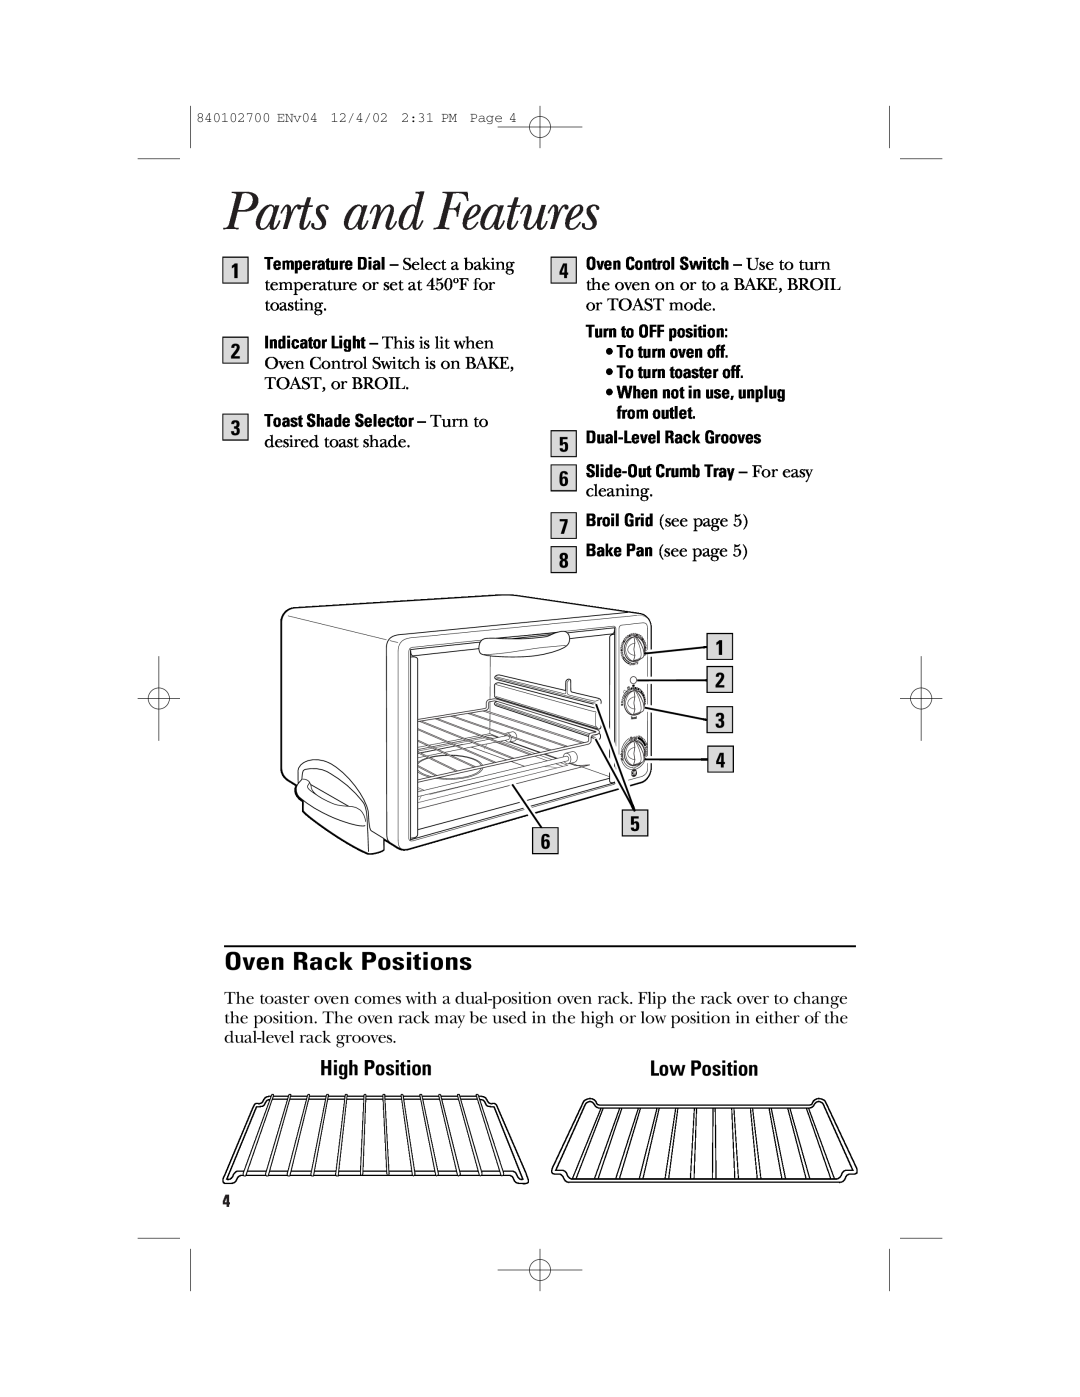 GE 840102700 Parts and Features, Oven Rack Positions, High Position, Turn to OFF position To turn oven off, Low Position 